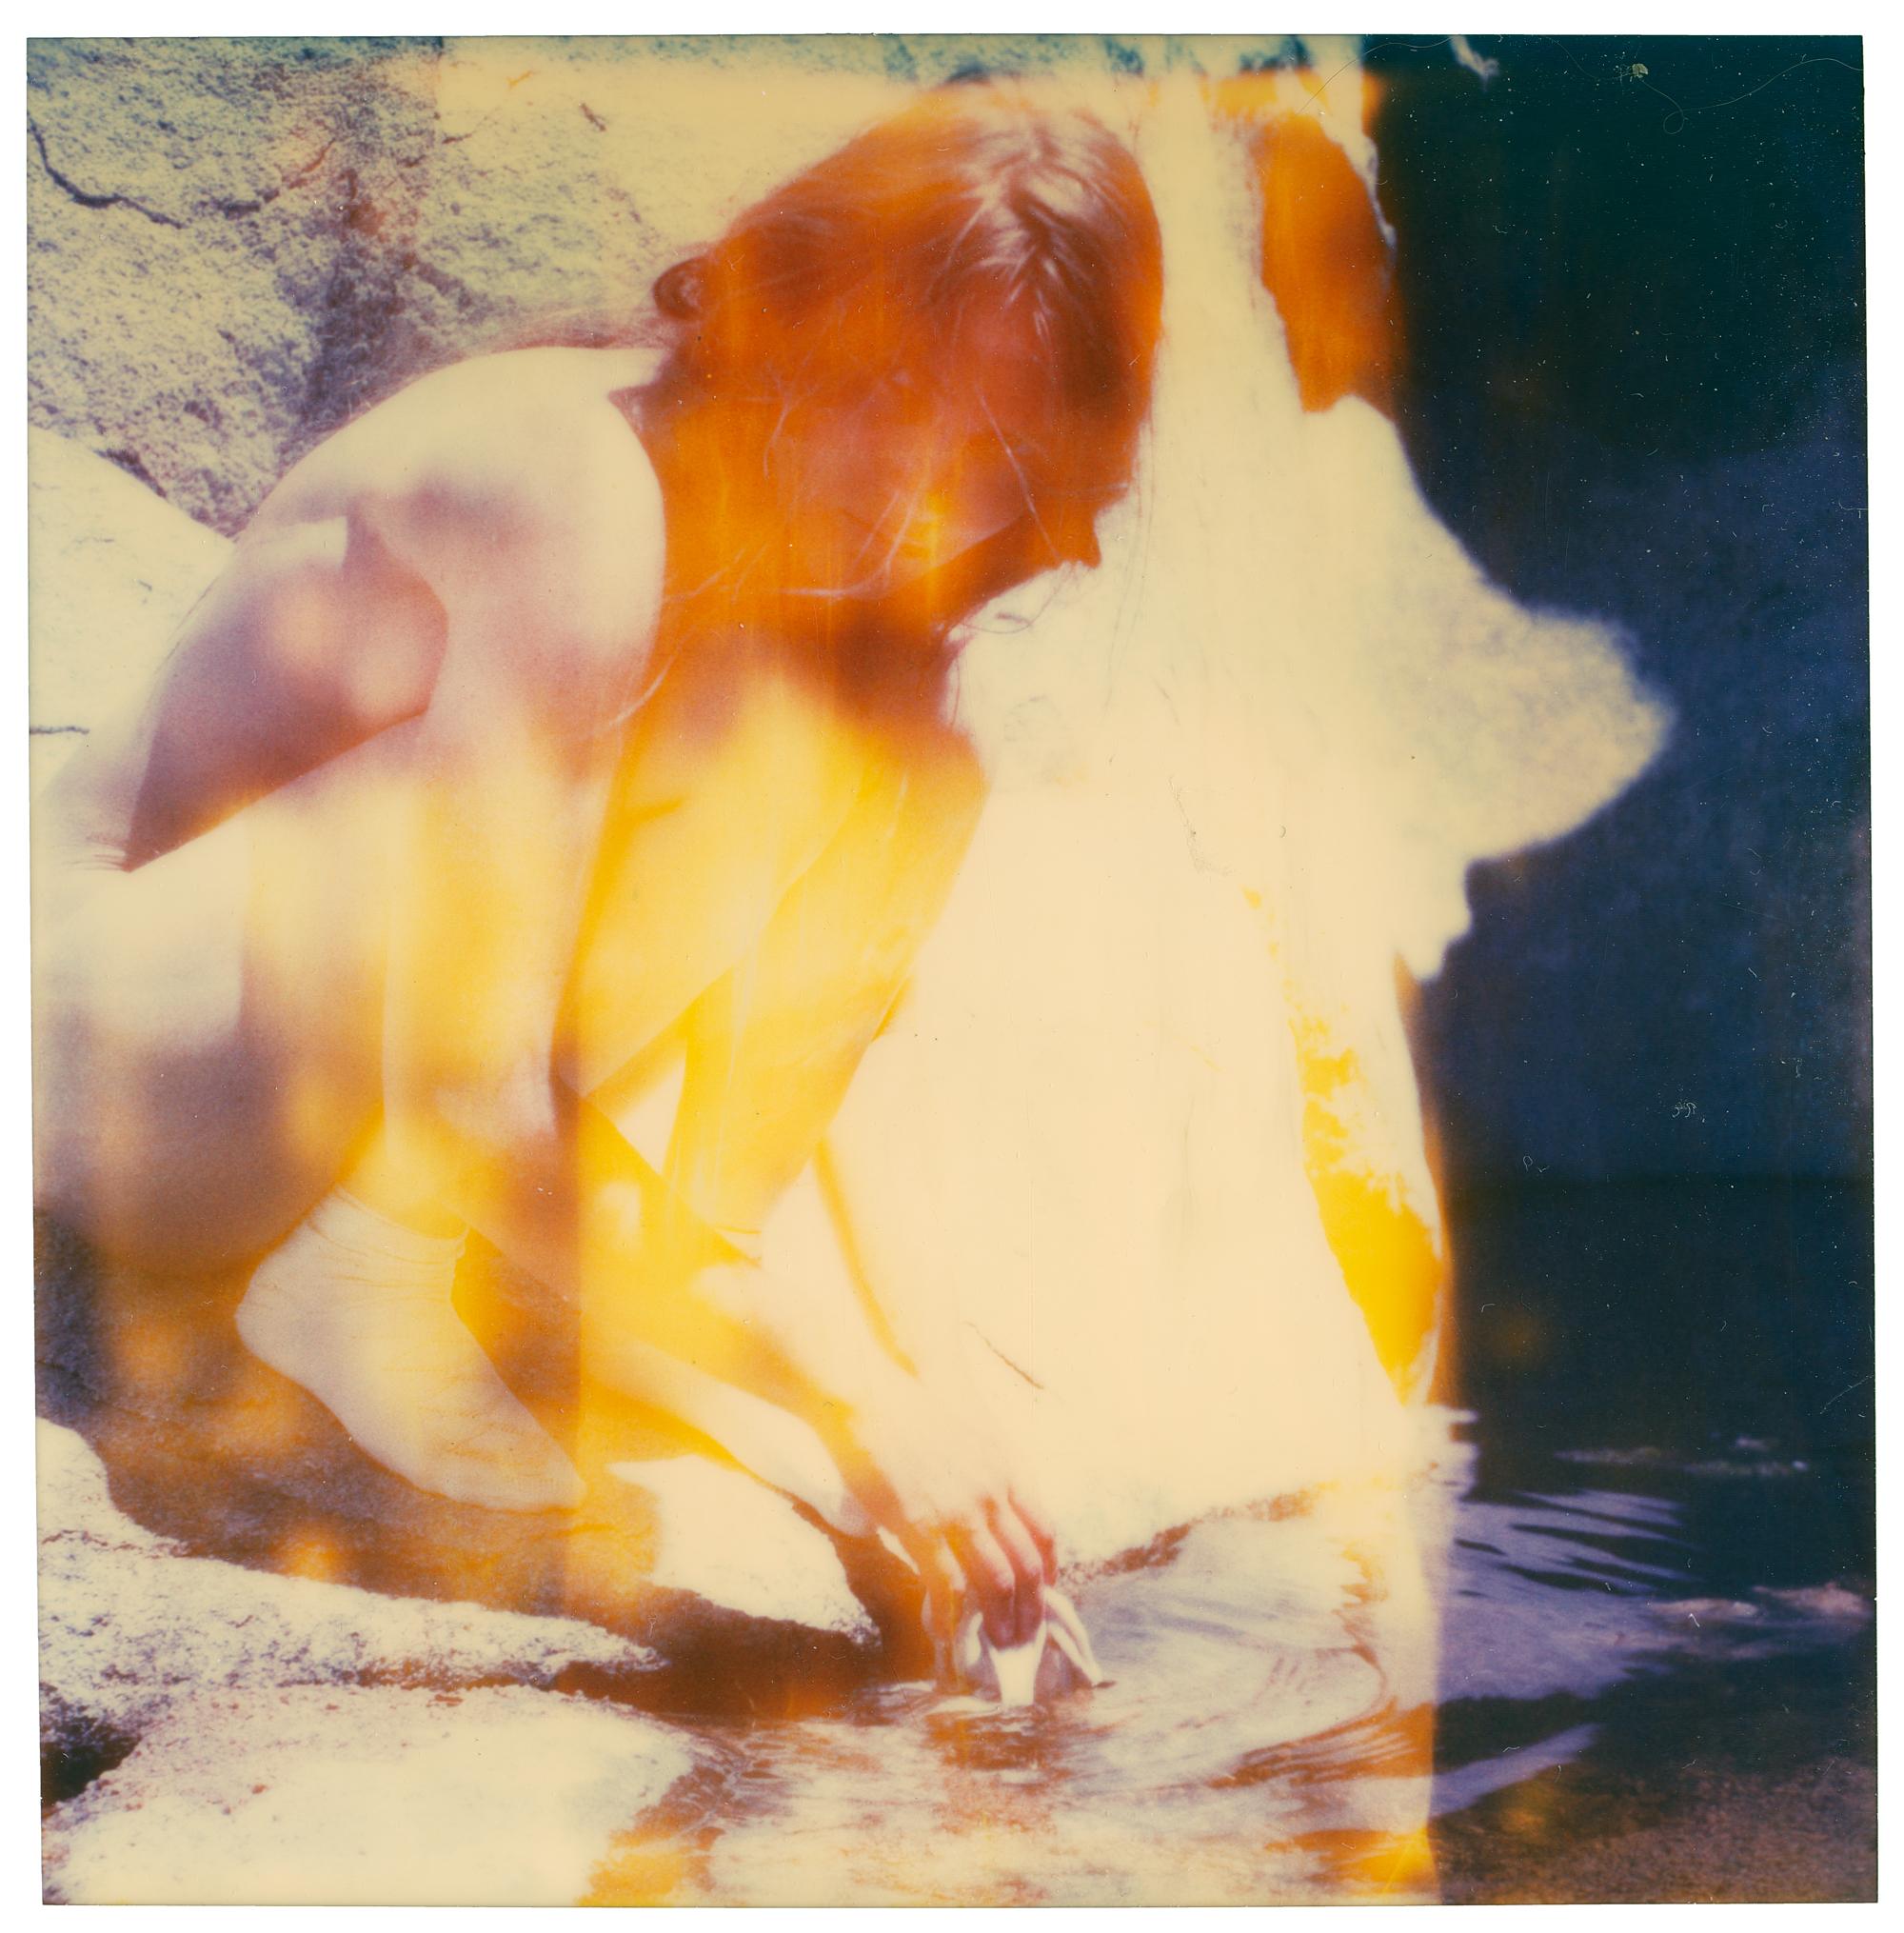 Abstract Photograph Stefanie Schneider - The Girl - Planet of the Apes 09 - 21e siècle, Polaroïd, Abstrait